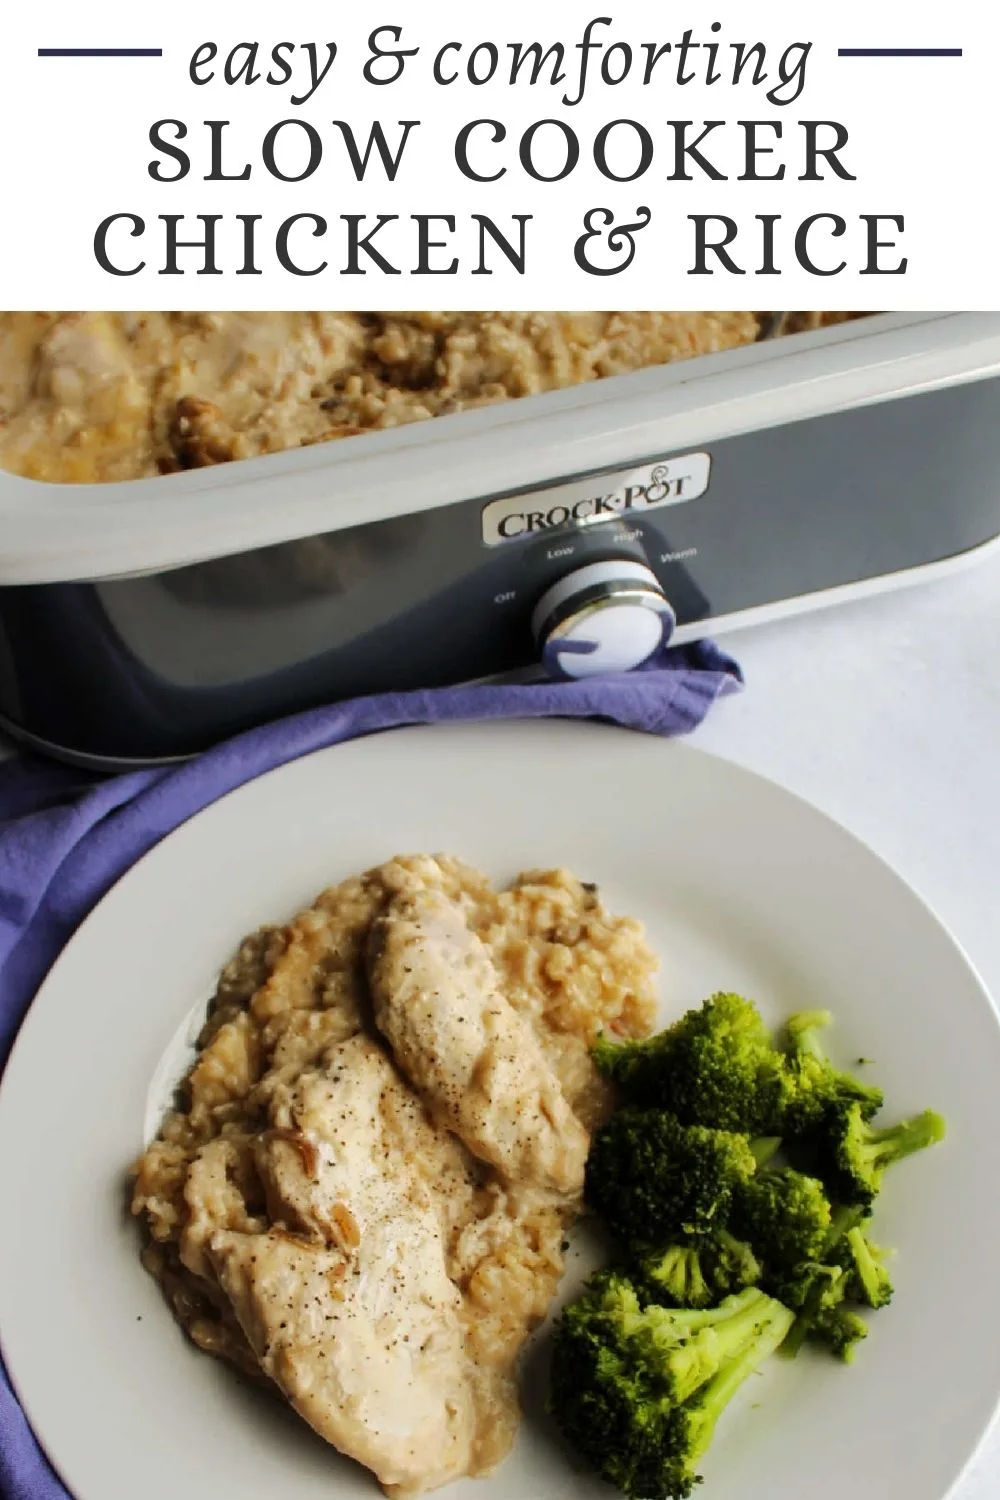 Andi's slow cooker chicken and rice is an easy meal that requires almost no prep work. It cooks while you go about your day. All you have to do is add a vegetable and dinner is ready.